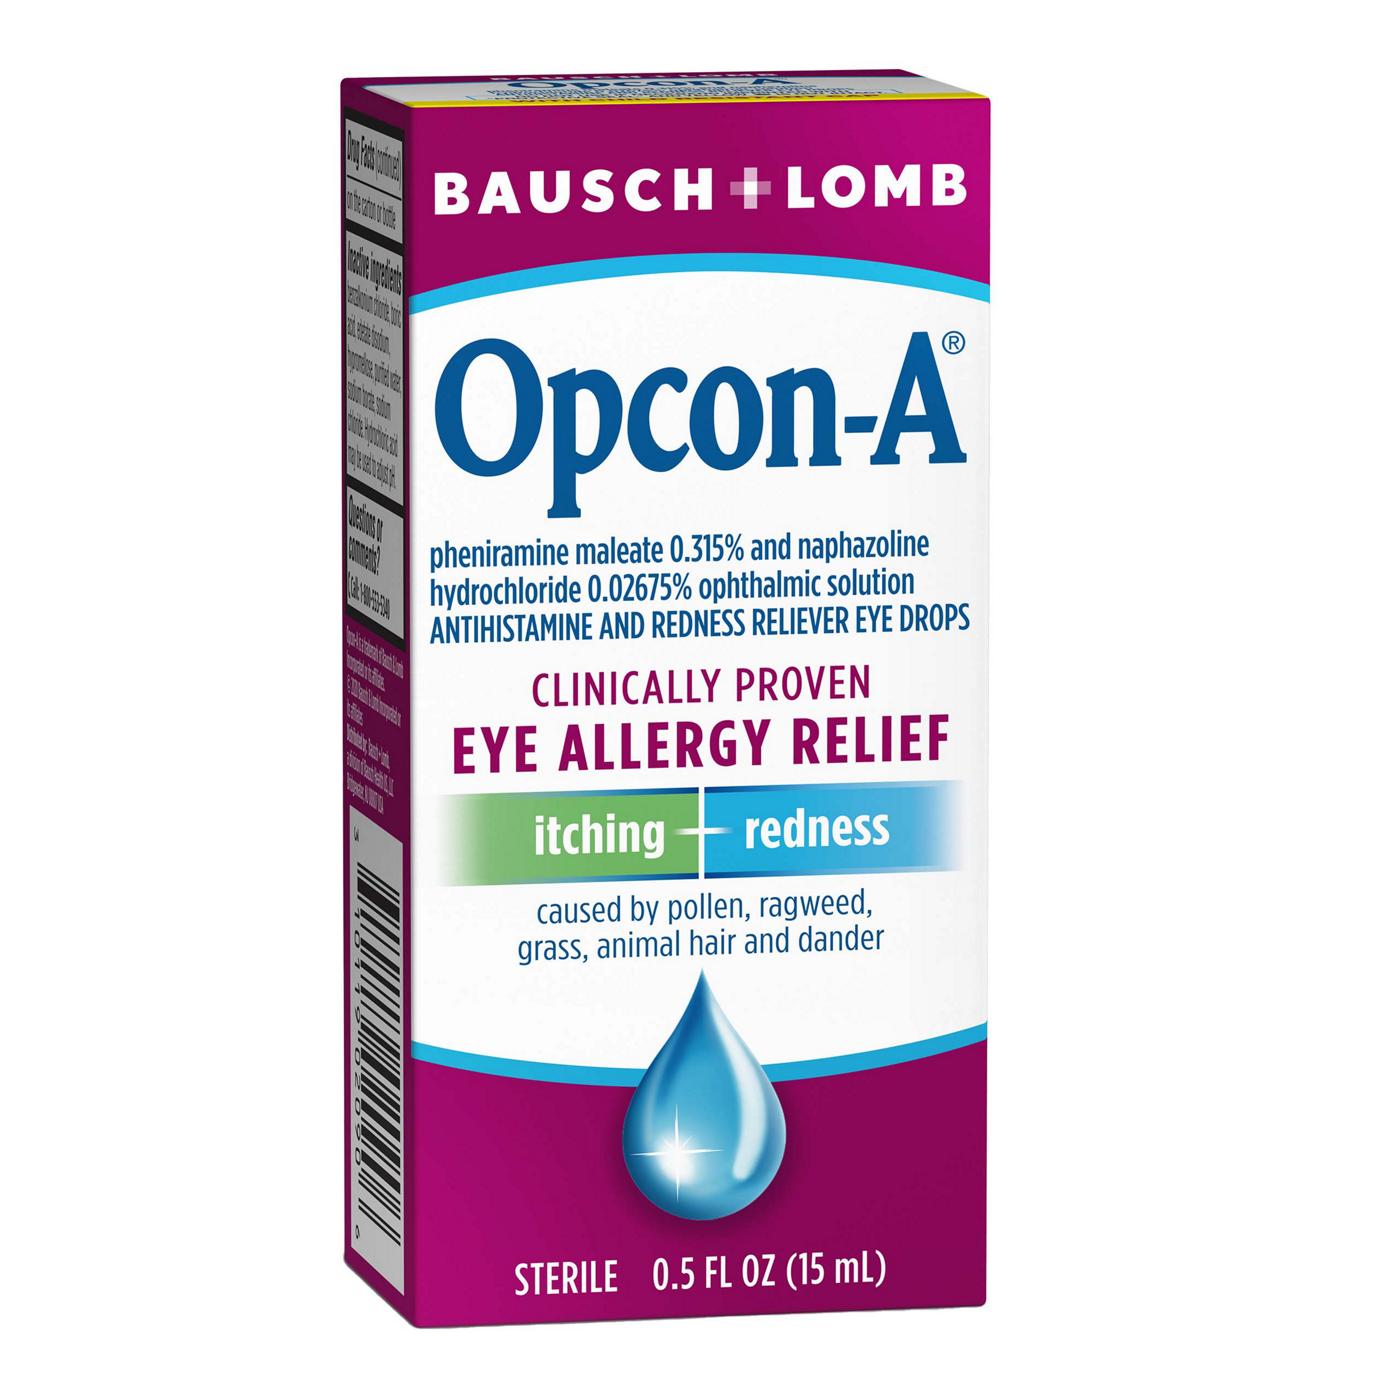 Bausch & Lomb Opcon-A Eye Allergy Relief Drops; image 3 of 3